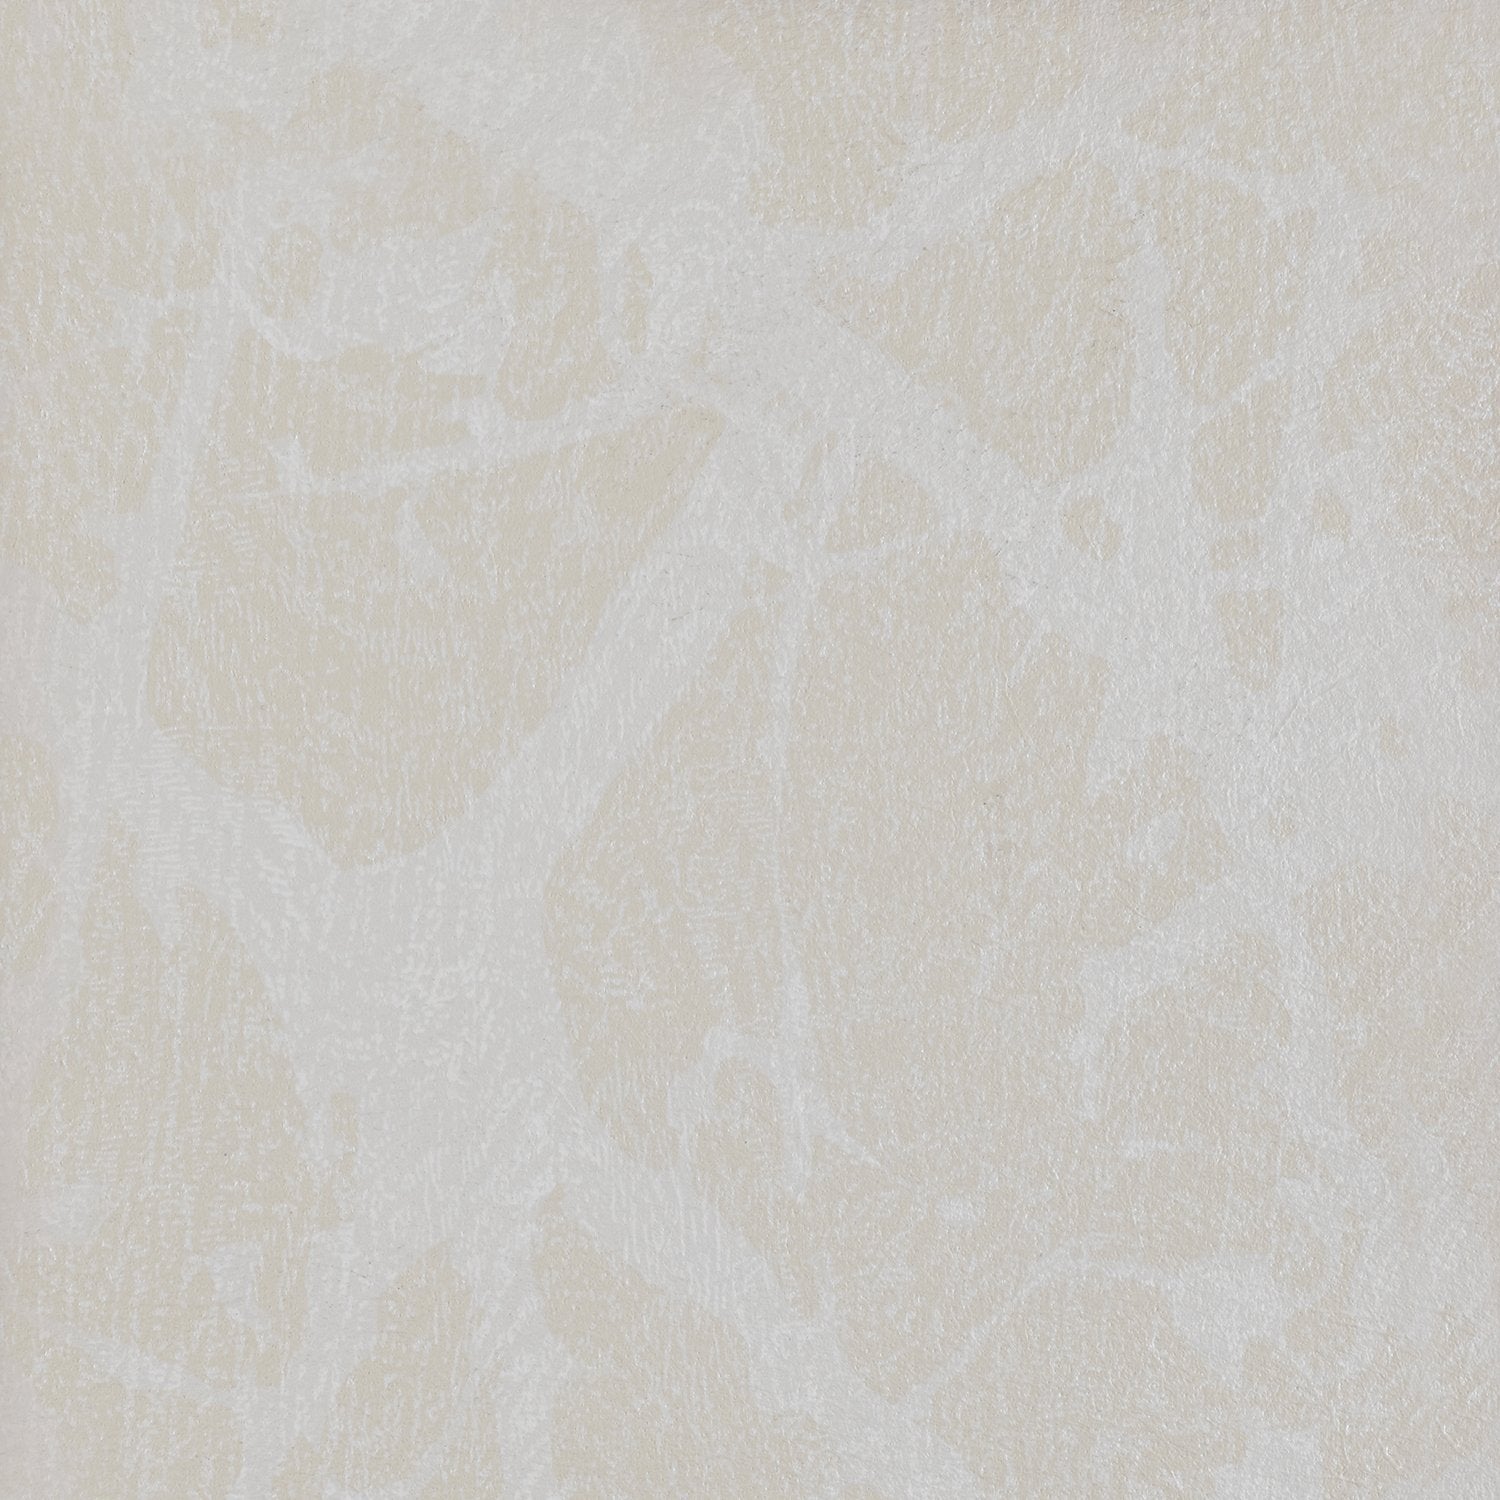 Canopy - Y46840 - Wallcovering - Vycon - Kube Contract